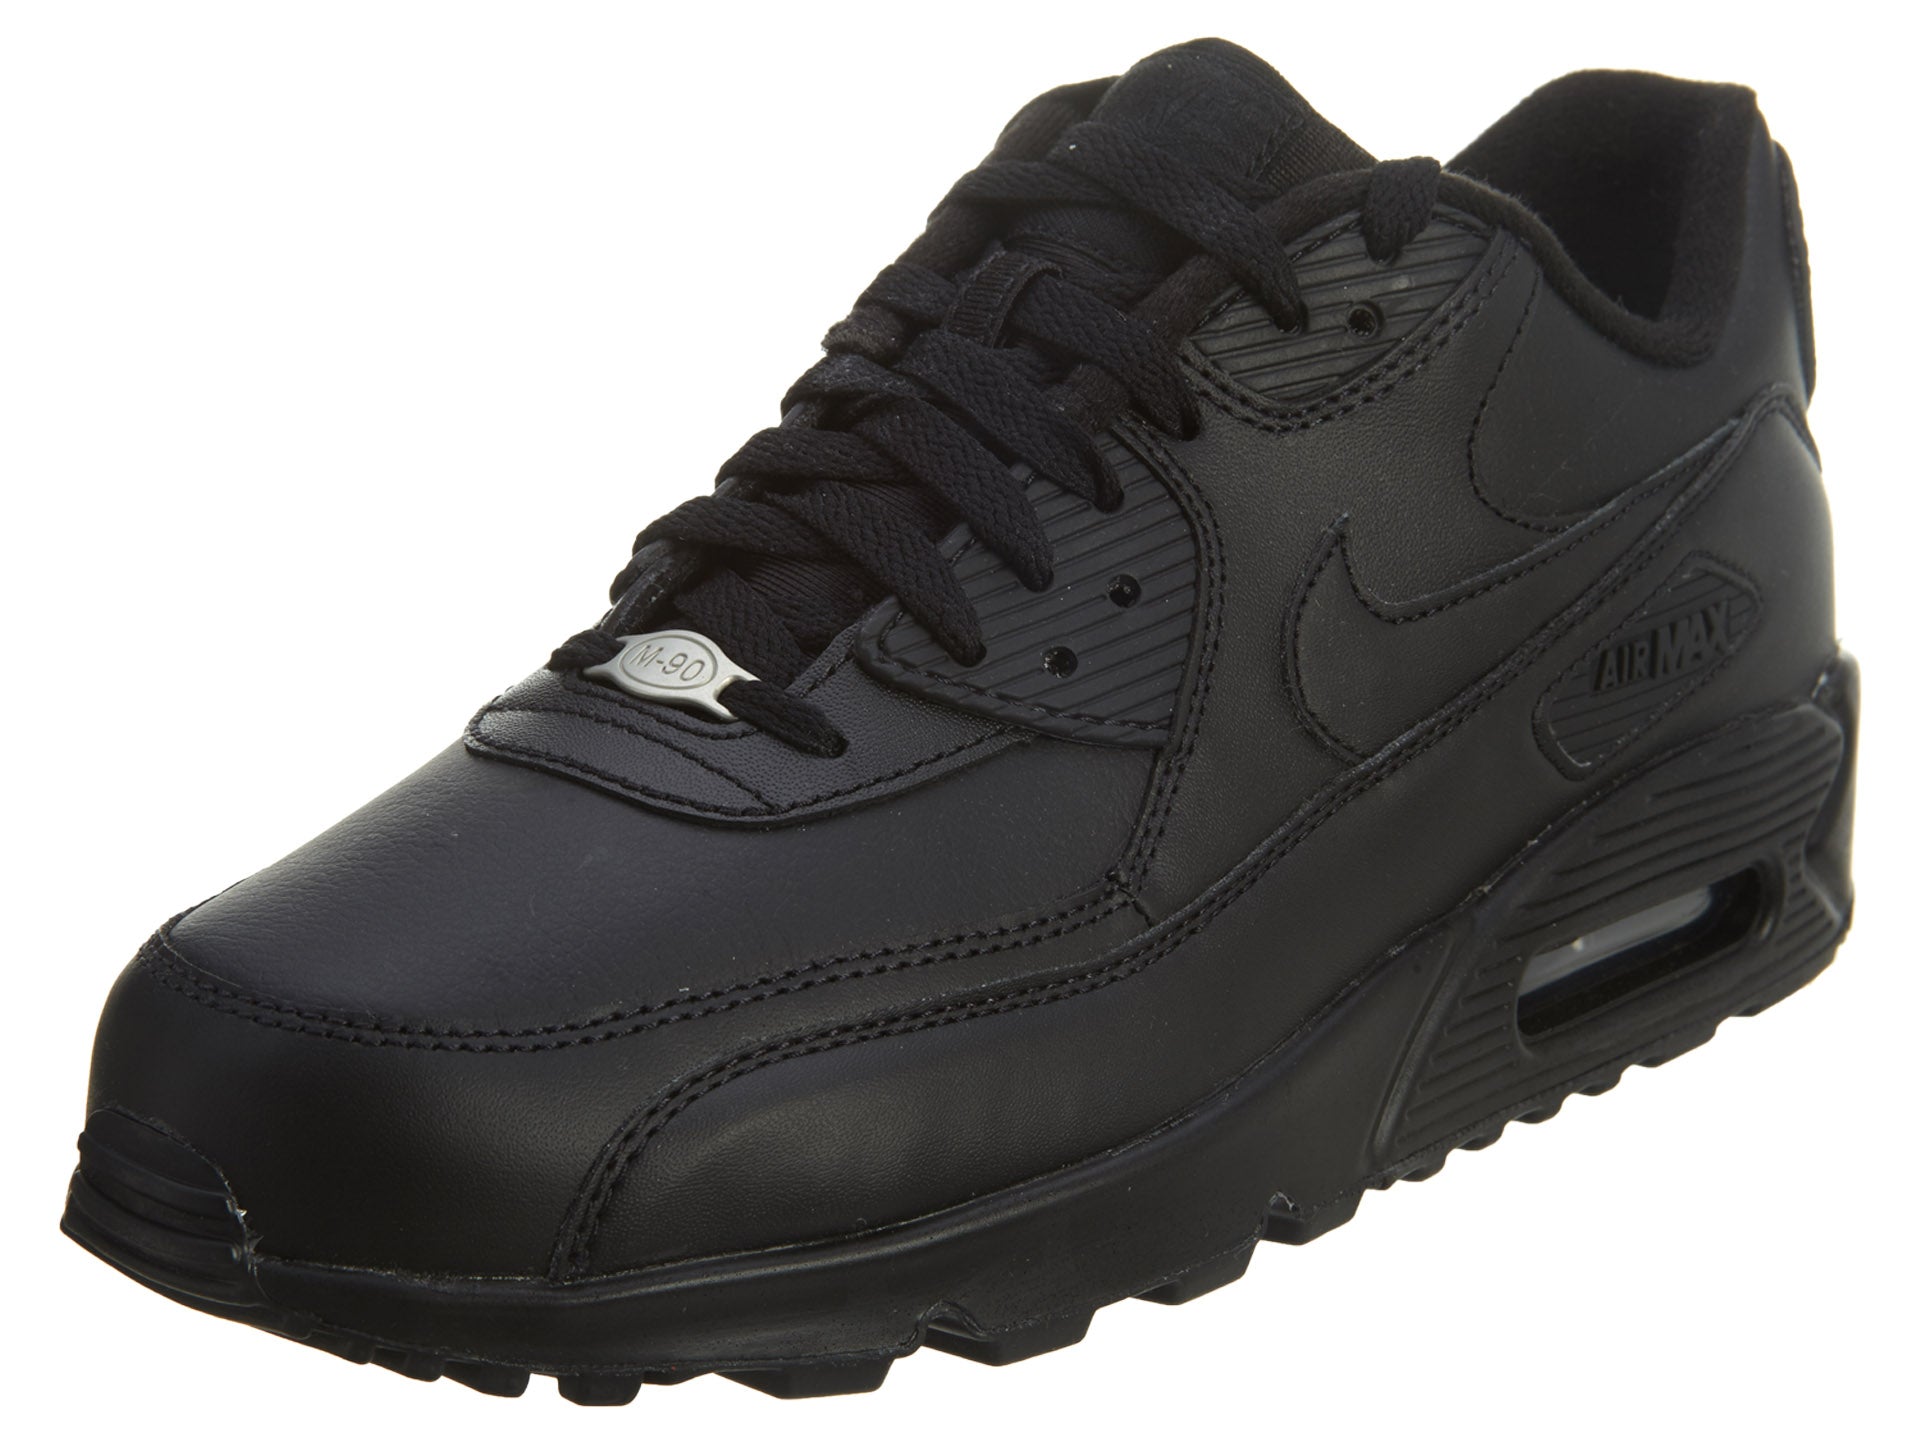 Nike Air Max 90 Leather Black Mens Running Shoes 302519-001